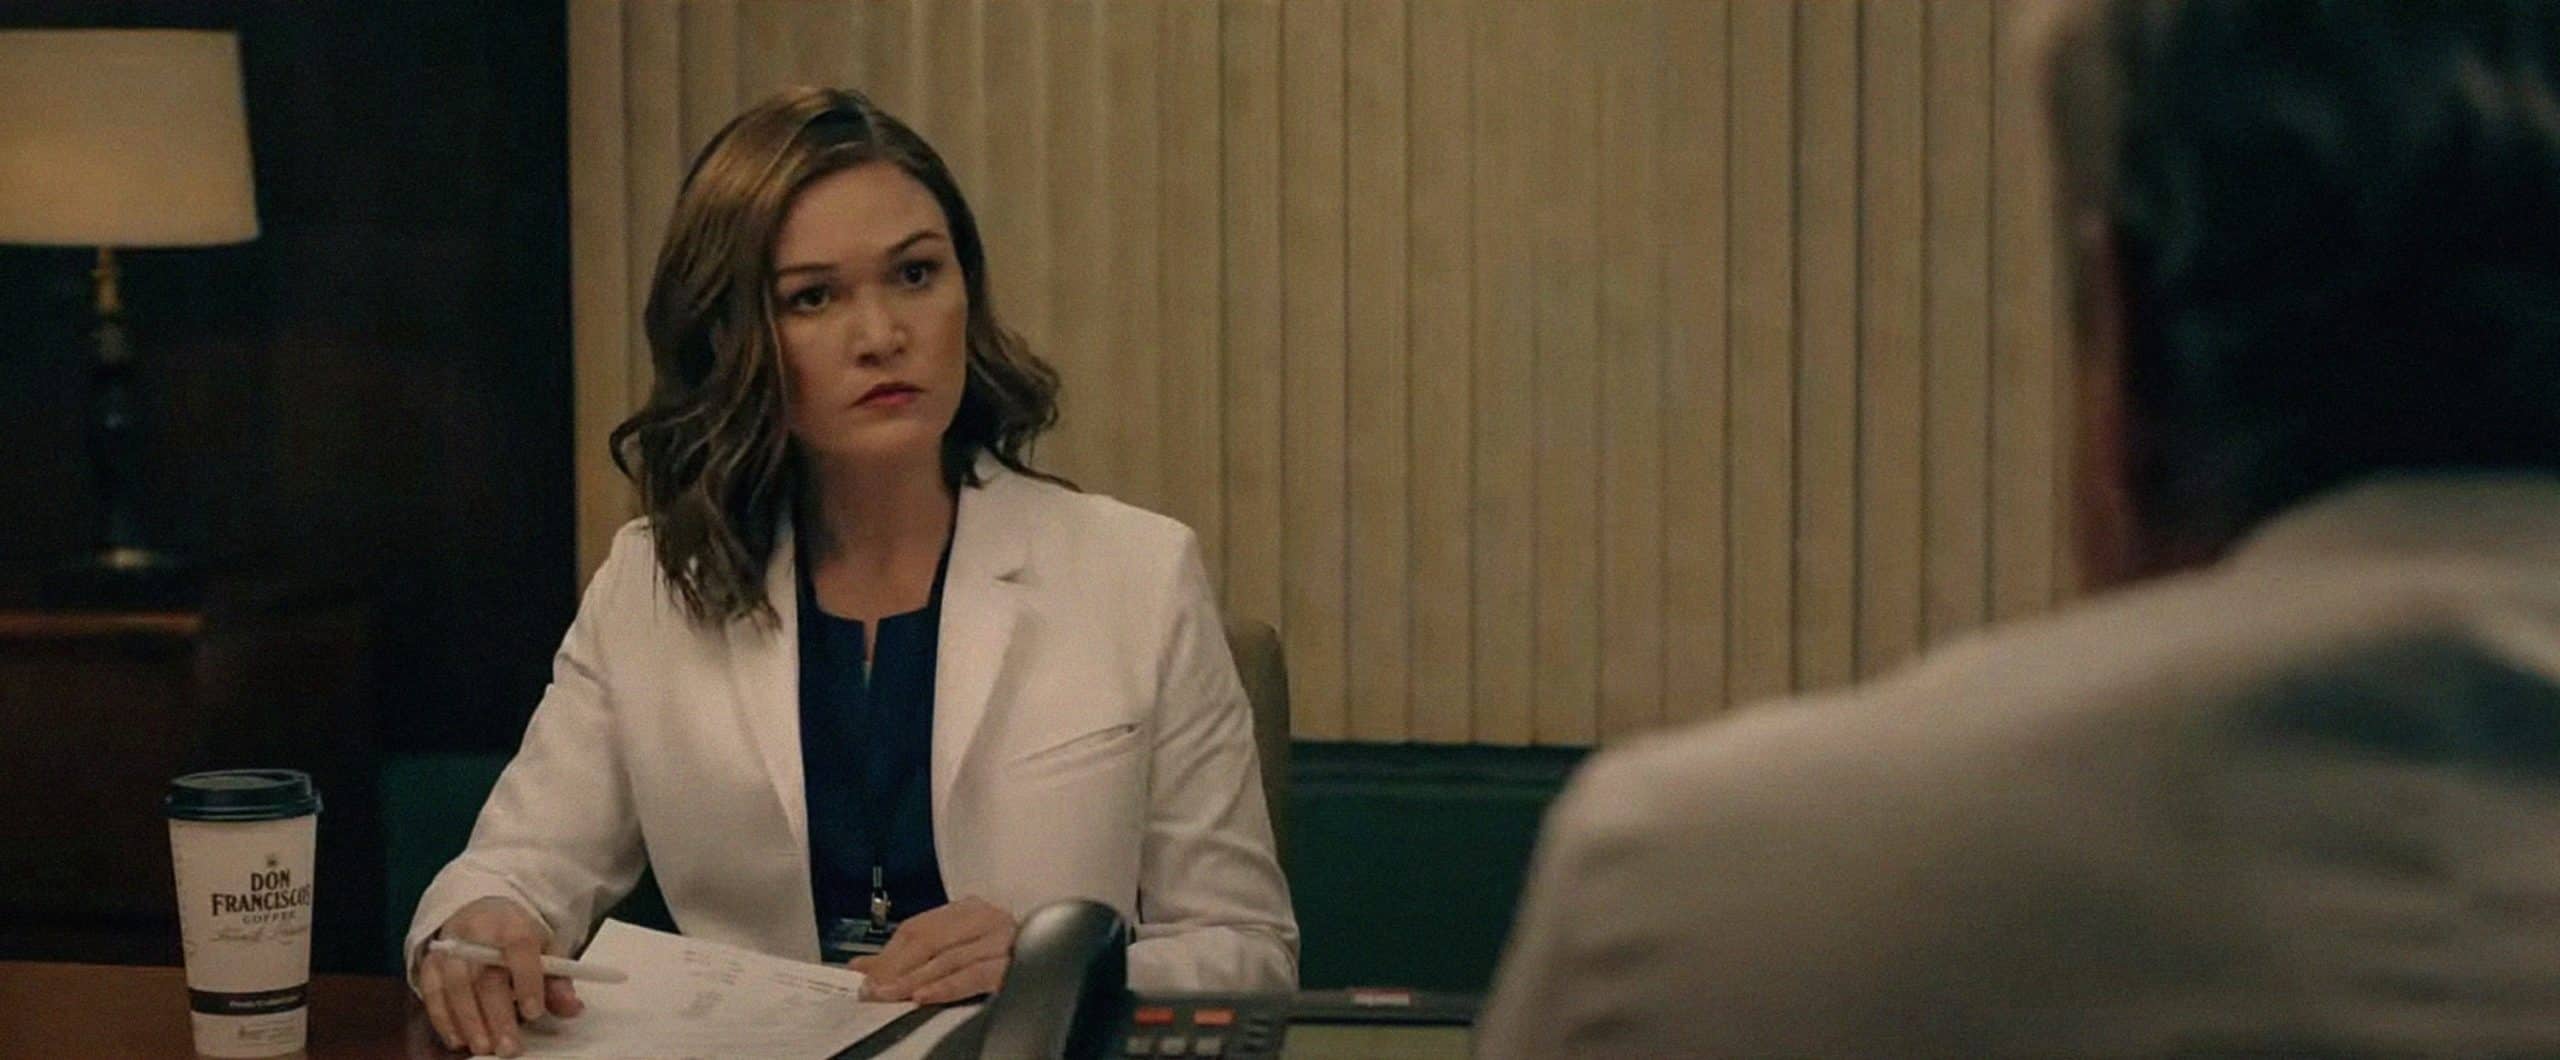 What is Julia Stiles up to?